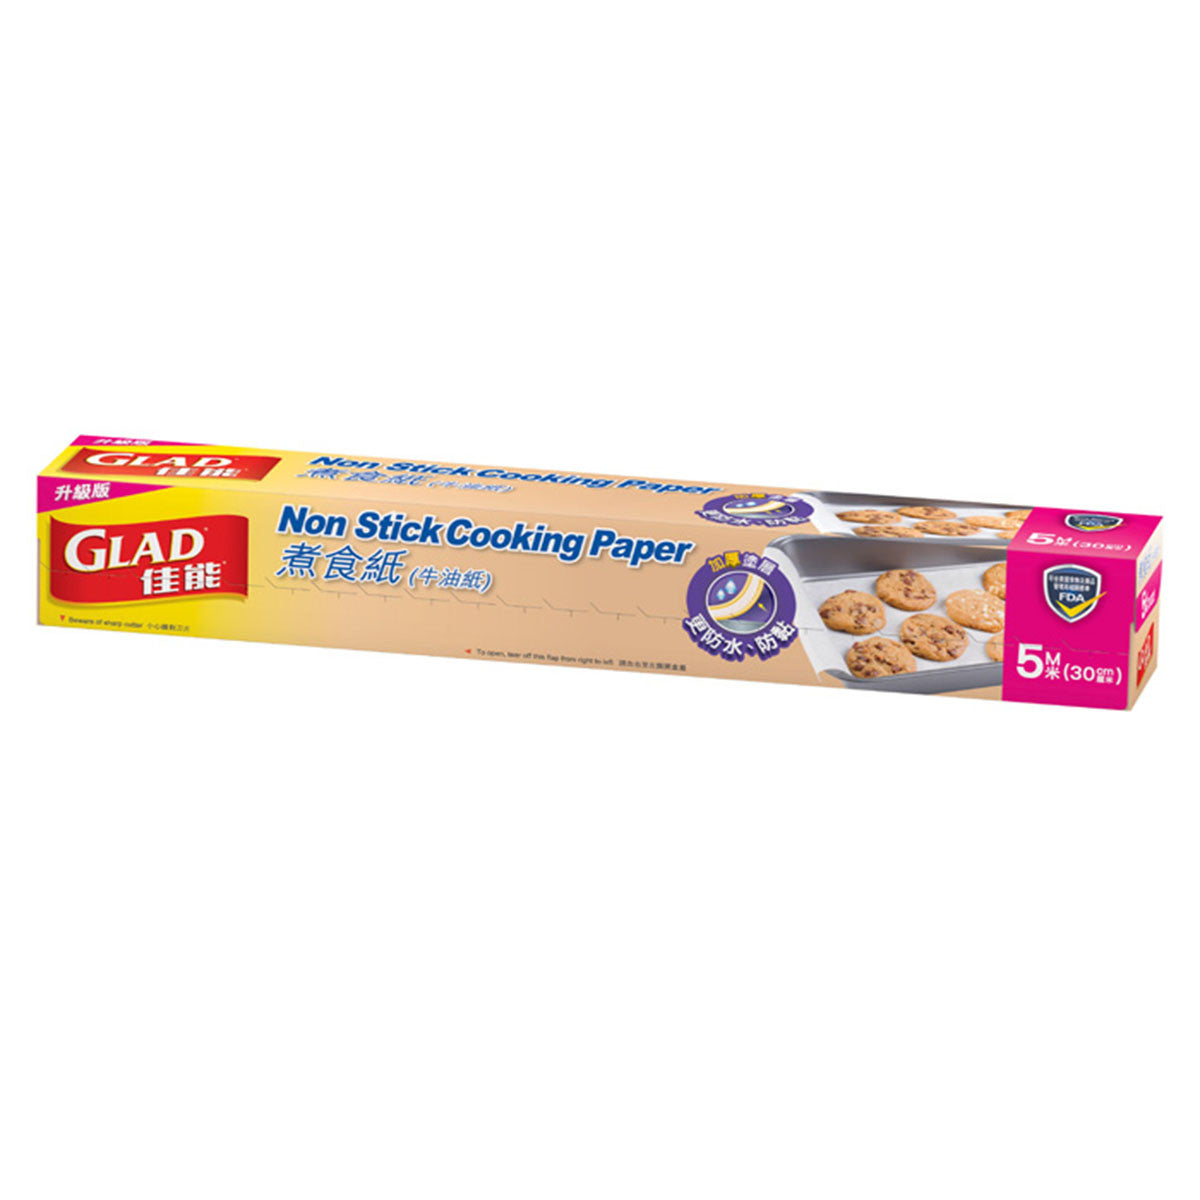 Baking Paper in Roll - Non stick cooking paper